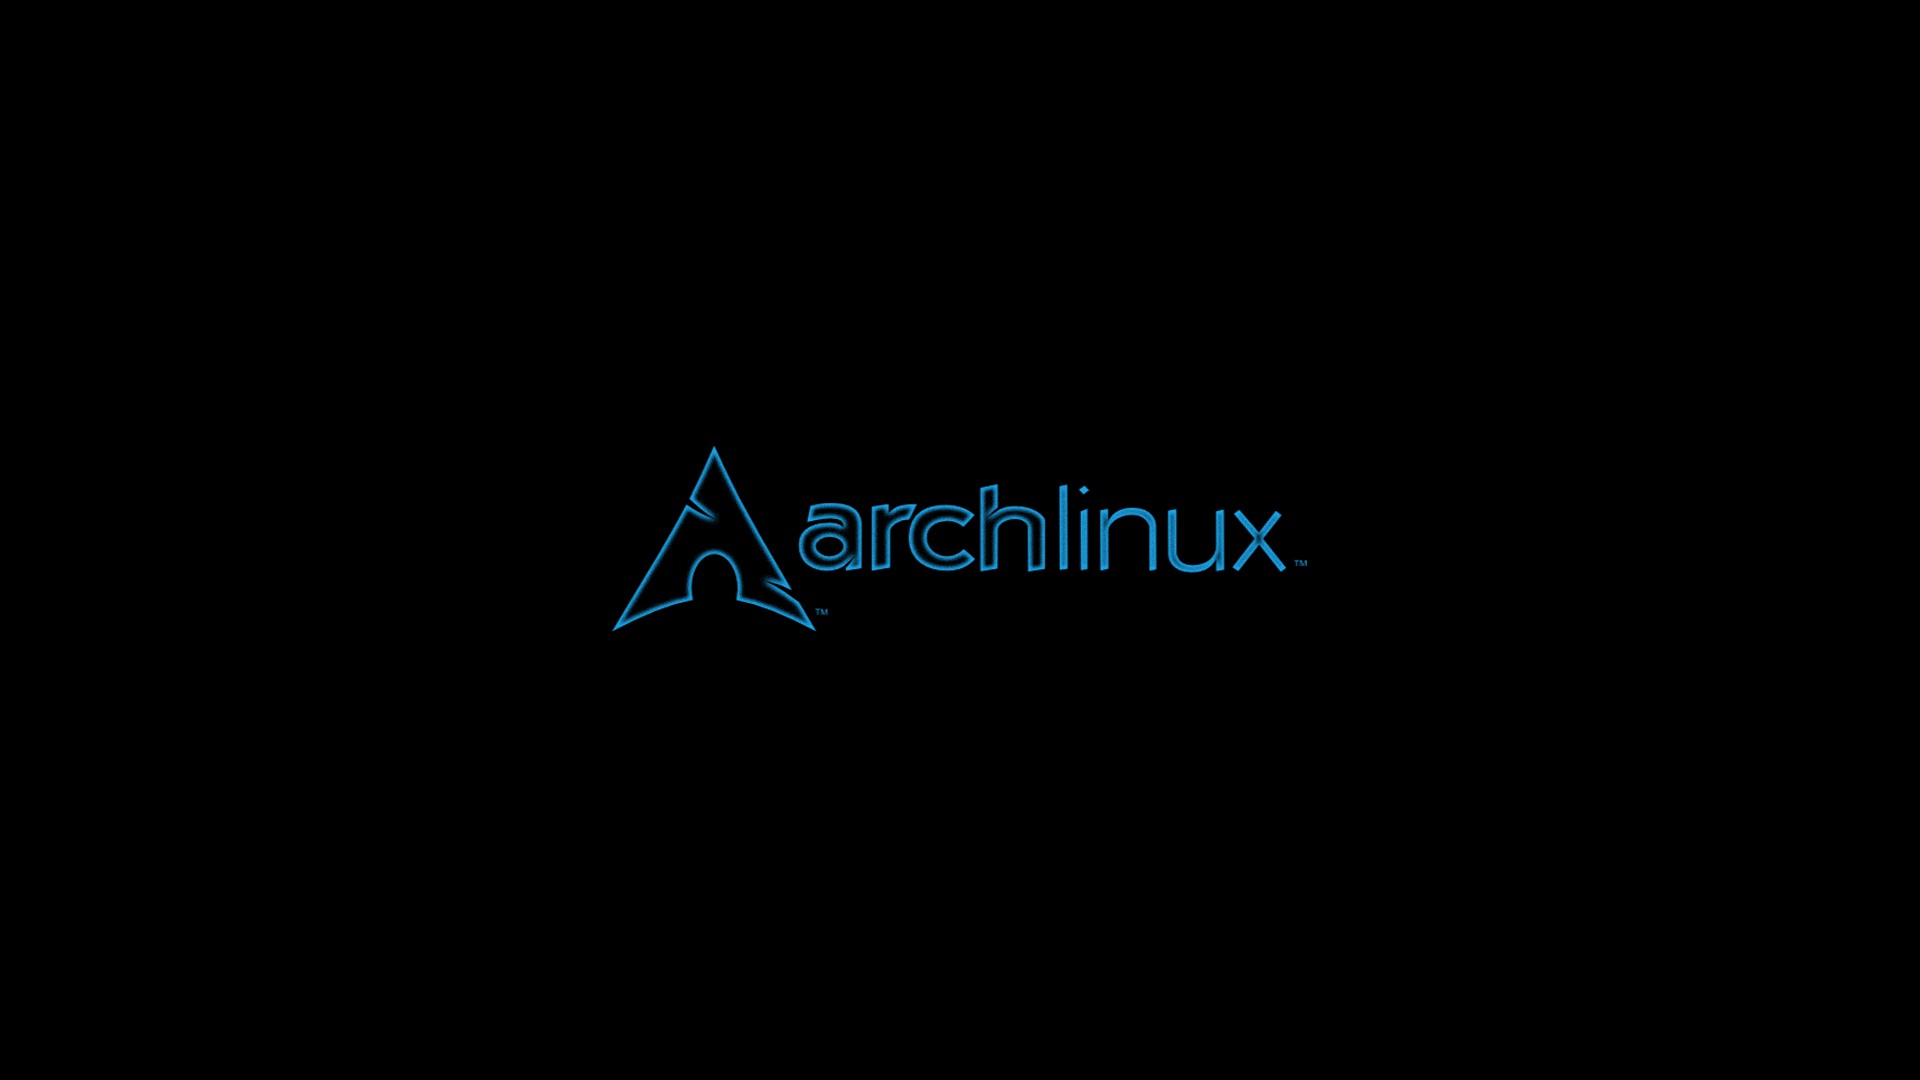 Linux Arch Linux Wallpapers Hd Desktop And Mobile Backgrounds